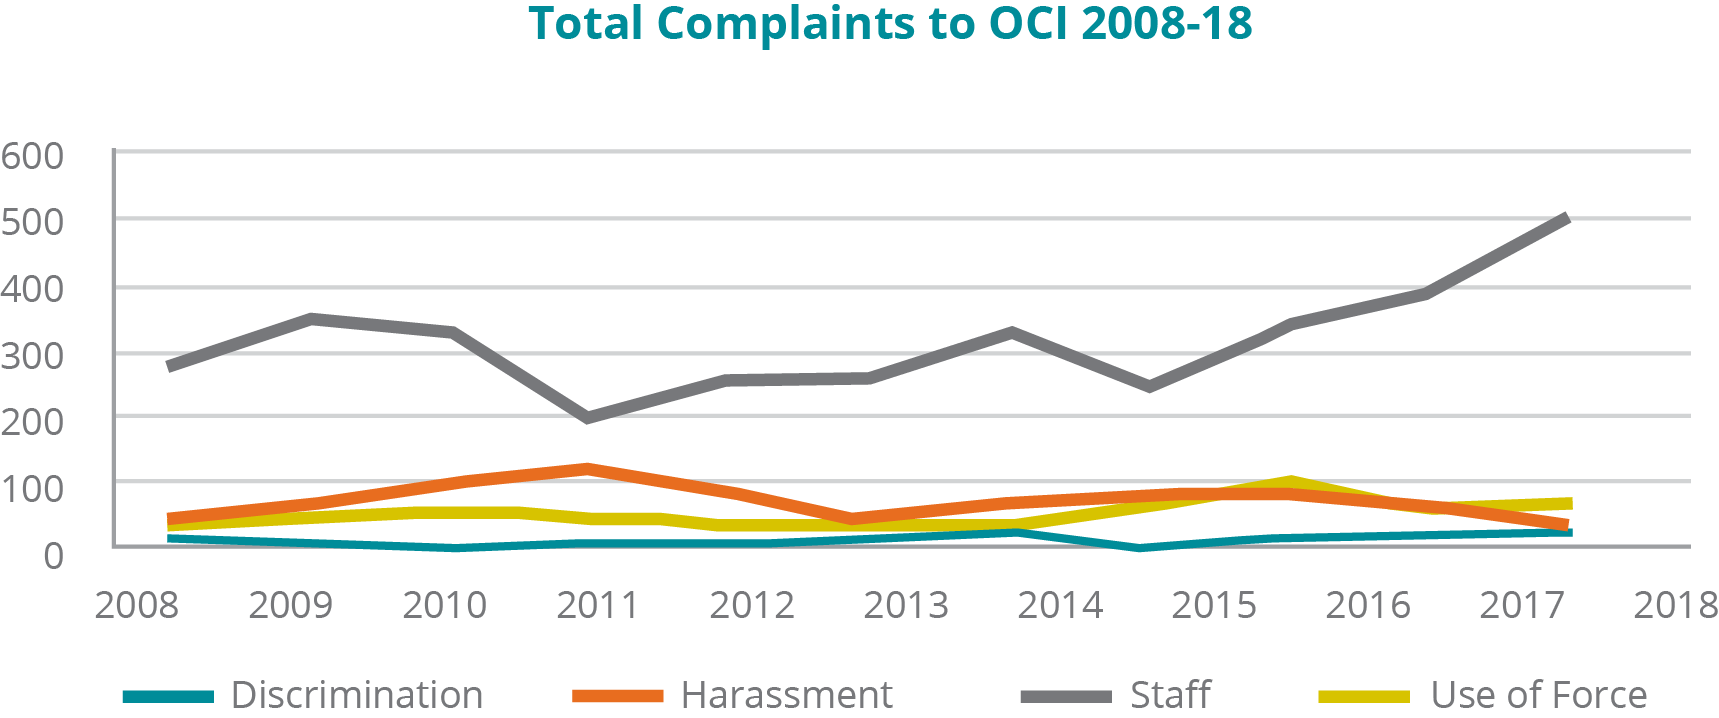 A graph depicting the number of total complaints of a specific type to the OCI from 2008 to 2018: - Complaints about Discrimination: In 2008, 12; 2009, 8; 2010, 9; 2011, 13; 2012, 13; 2013, 10; 2014, 18; 2015, 8; 2016, 17; 2017, 18; 2018, 26. - Complaints about Harassment: In 2008, 38; 2009, 69; 2010, 93; 2011, 115; 2012, 85; 2013, 40; 2014, 60; 2015, 80; 2016, 82; 2017, 65; 2018, 33. -	Complaints about Staff: In 2008, 275; 2009, 339; 2010, 322; 2011, 198; 2012, 251; 2013, 254; 2014, 315; 2015, 242; 2016, 329; 2017, 381; 2018, 495. - Complaints about Use of Force: In 2008, 35; 2009, 45; 2010, 51; 2011, 50; 2012, 35; 2013, 40; 2014, 43; 2015, 63; 2016, 97; 2017, 61; 2018, 64.